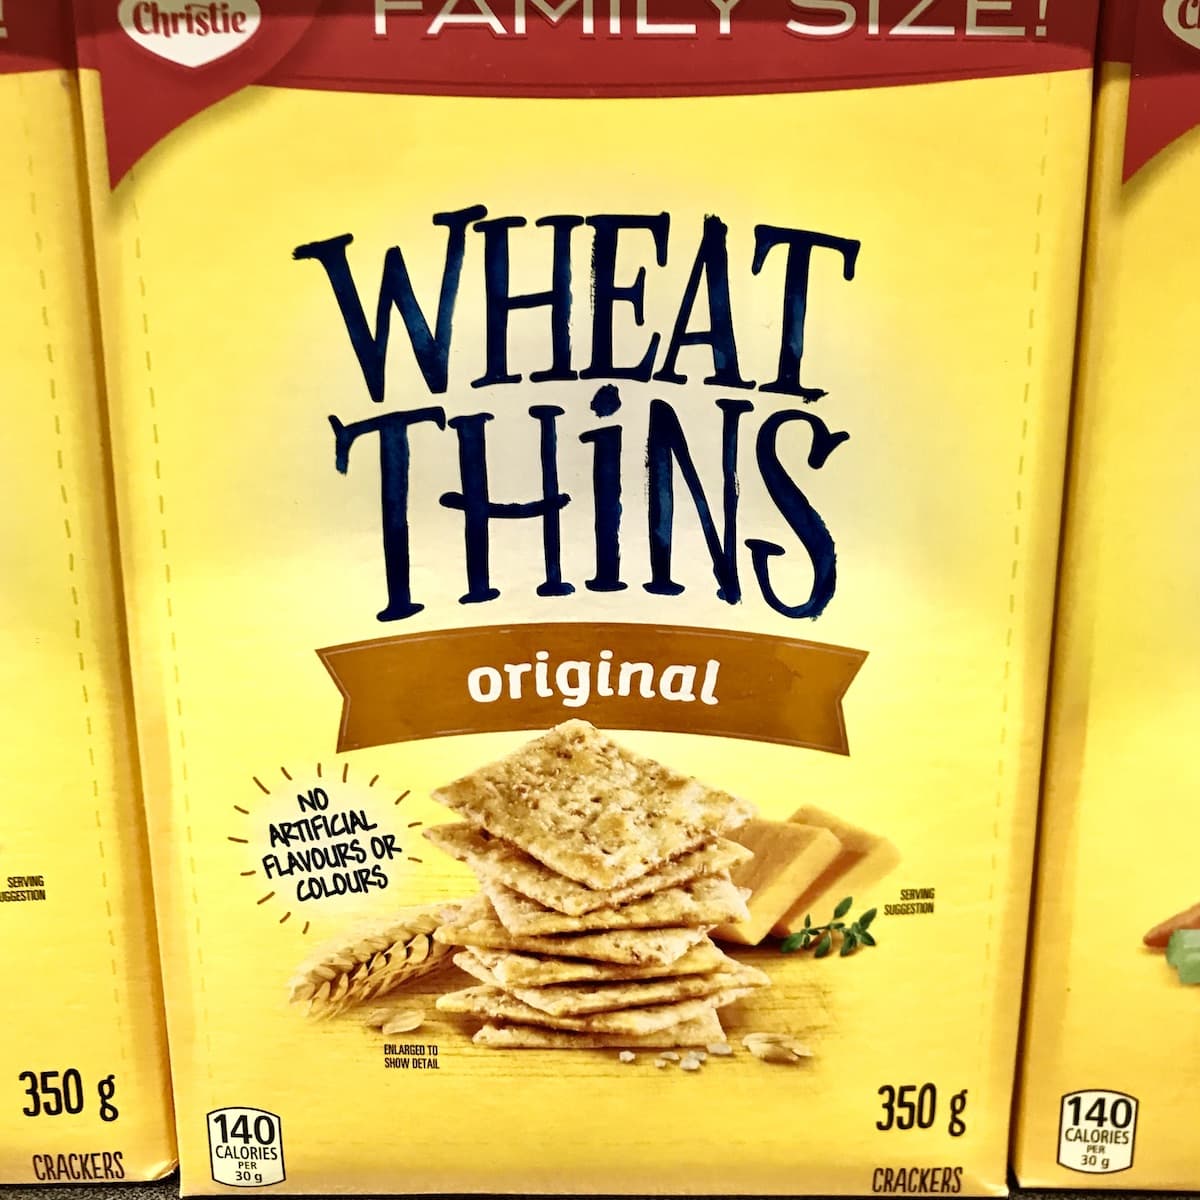 A box of Wheat Thins original crackers.